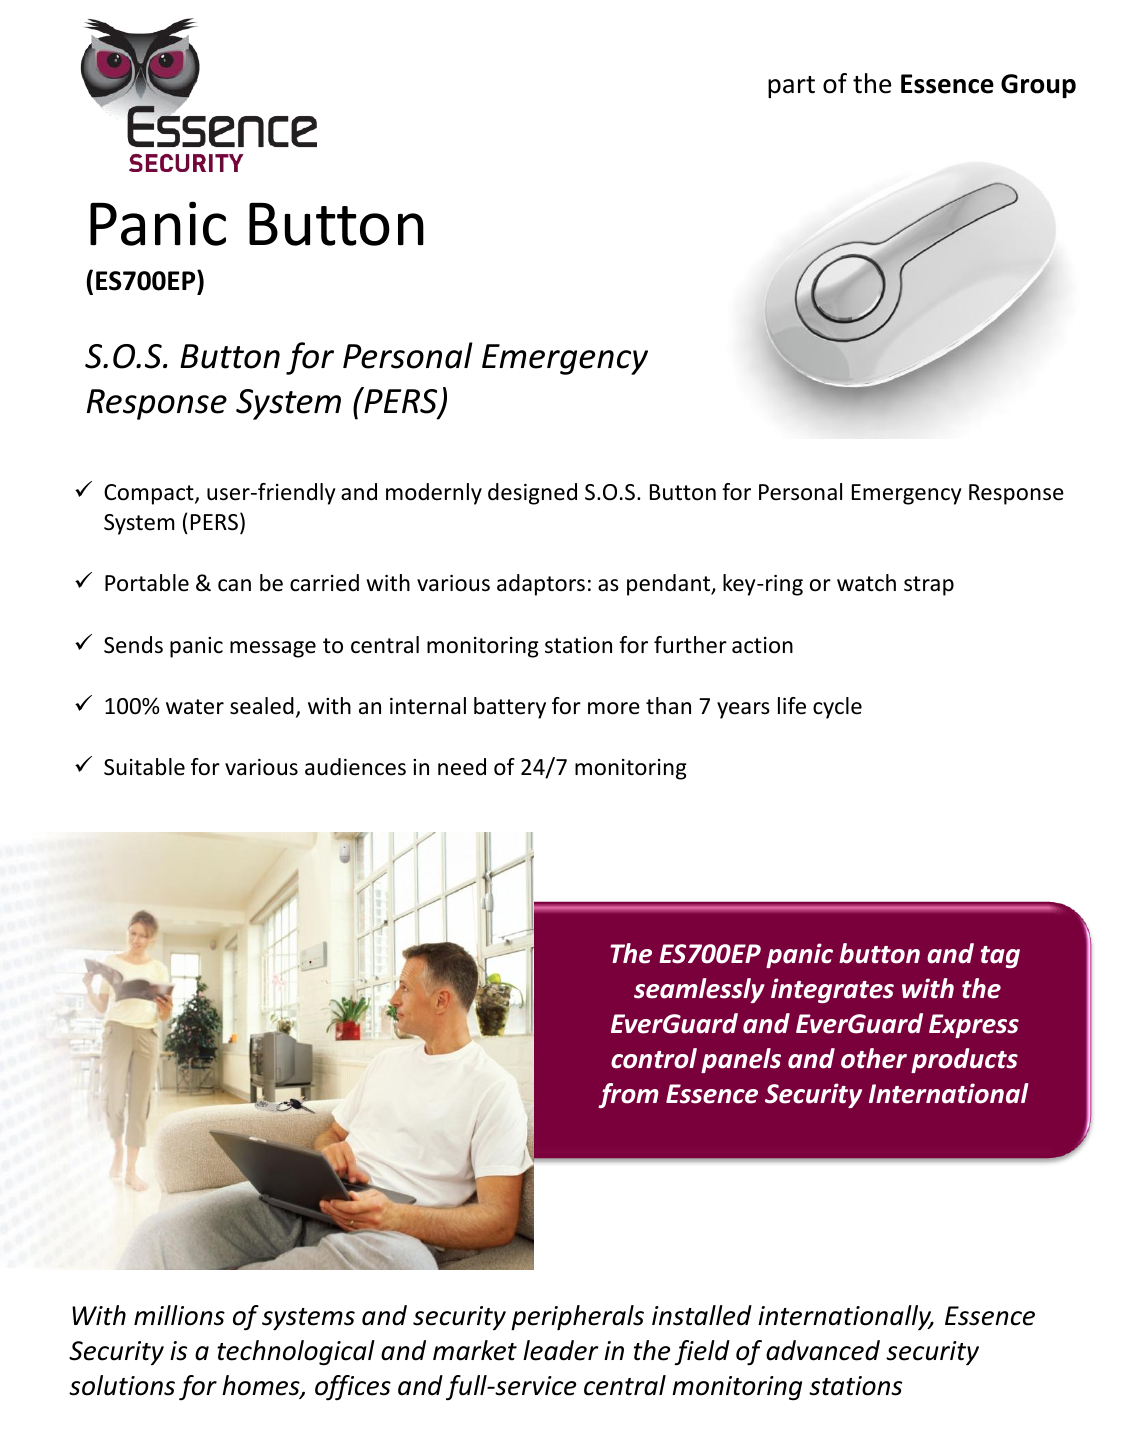   Panic Button (ES700EP)  S.O.S. Button for Personal Emergency Response System (PERS) Compact, user-friendly and modernly designed S.O.S. Button for Personal Emergency Response System (PERS) Portable &amp; can be carried with various adaptors: as pendant, key-ring or watch strap Sends panic message to central monitoring station for further action  100% water sealed, with an internal battery for more than 7 years life cycle Suitable for various audiences in need of 24/7 monitoring With millions of systems and security peripherals installed internationally, Essence Security is a technological and market leader in the field of advanced security solutions for homes, offices and full-service central monitoring stations The ES700EP panic button and tag  seamlessly integrates with the EverGuard and EverGuard Express control panels and other products from Essence Security International part of the Essence Group 